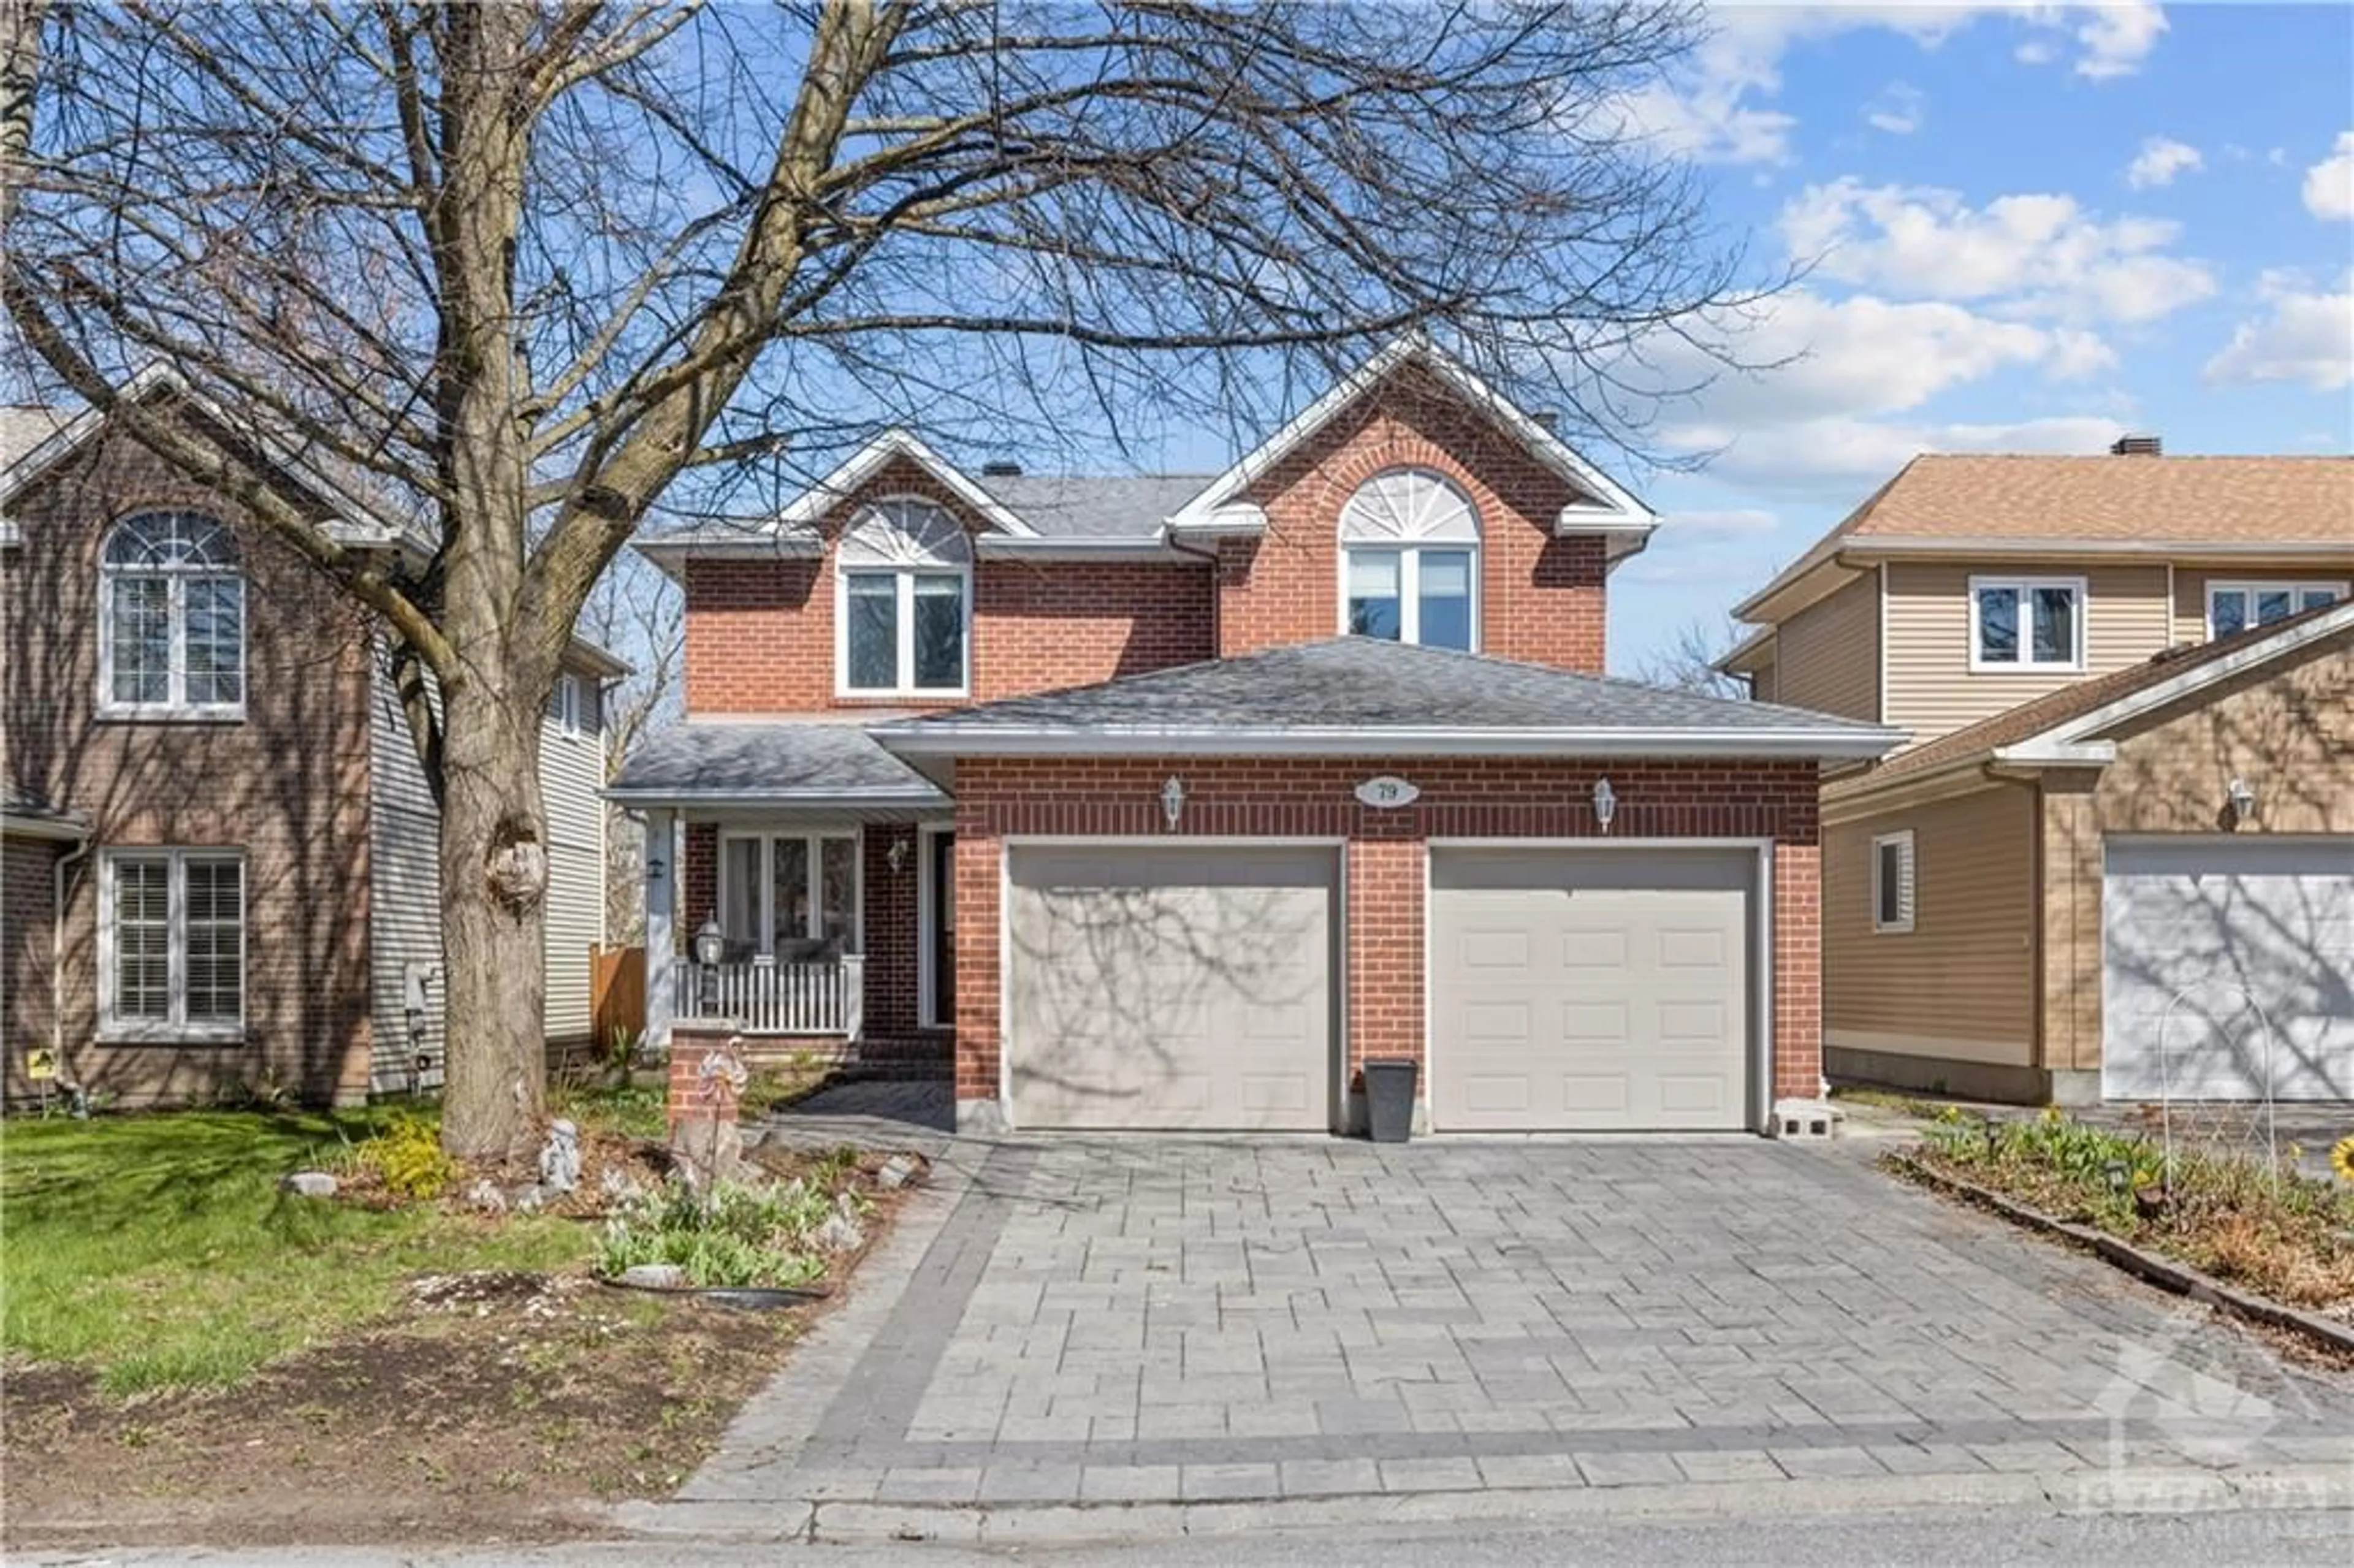 Home with brick exterior material for 79 BEDDINGTON Ave, Nepean Ontario K2J 3N4